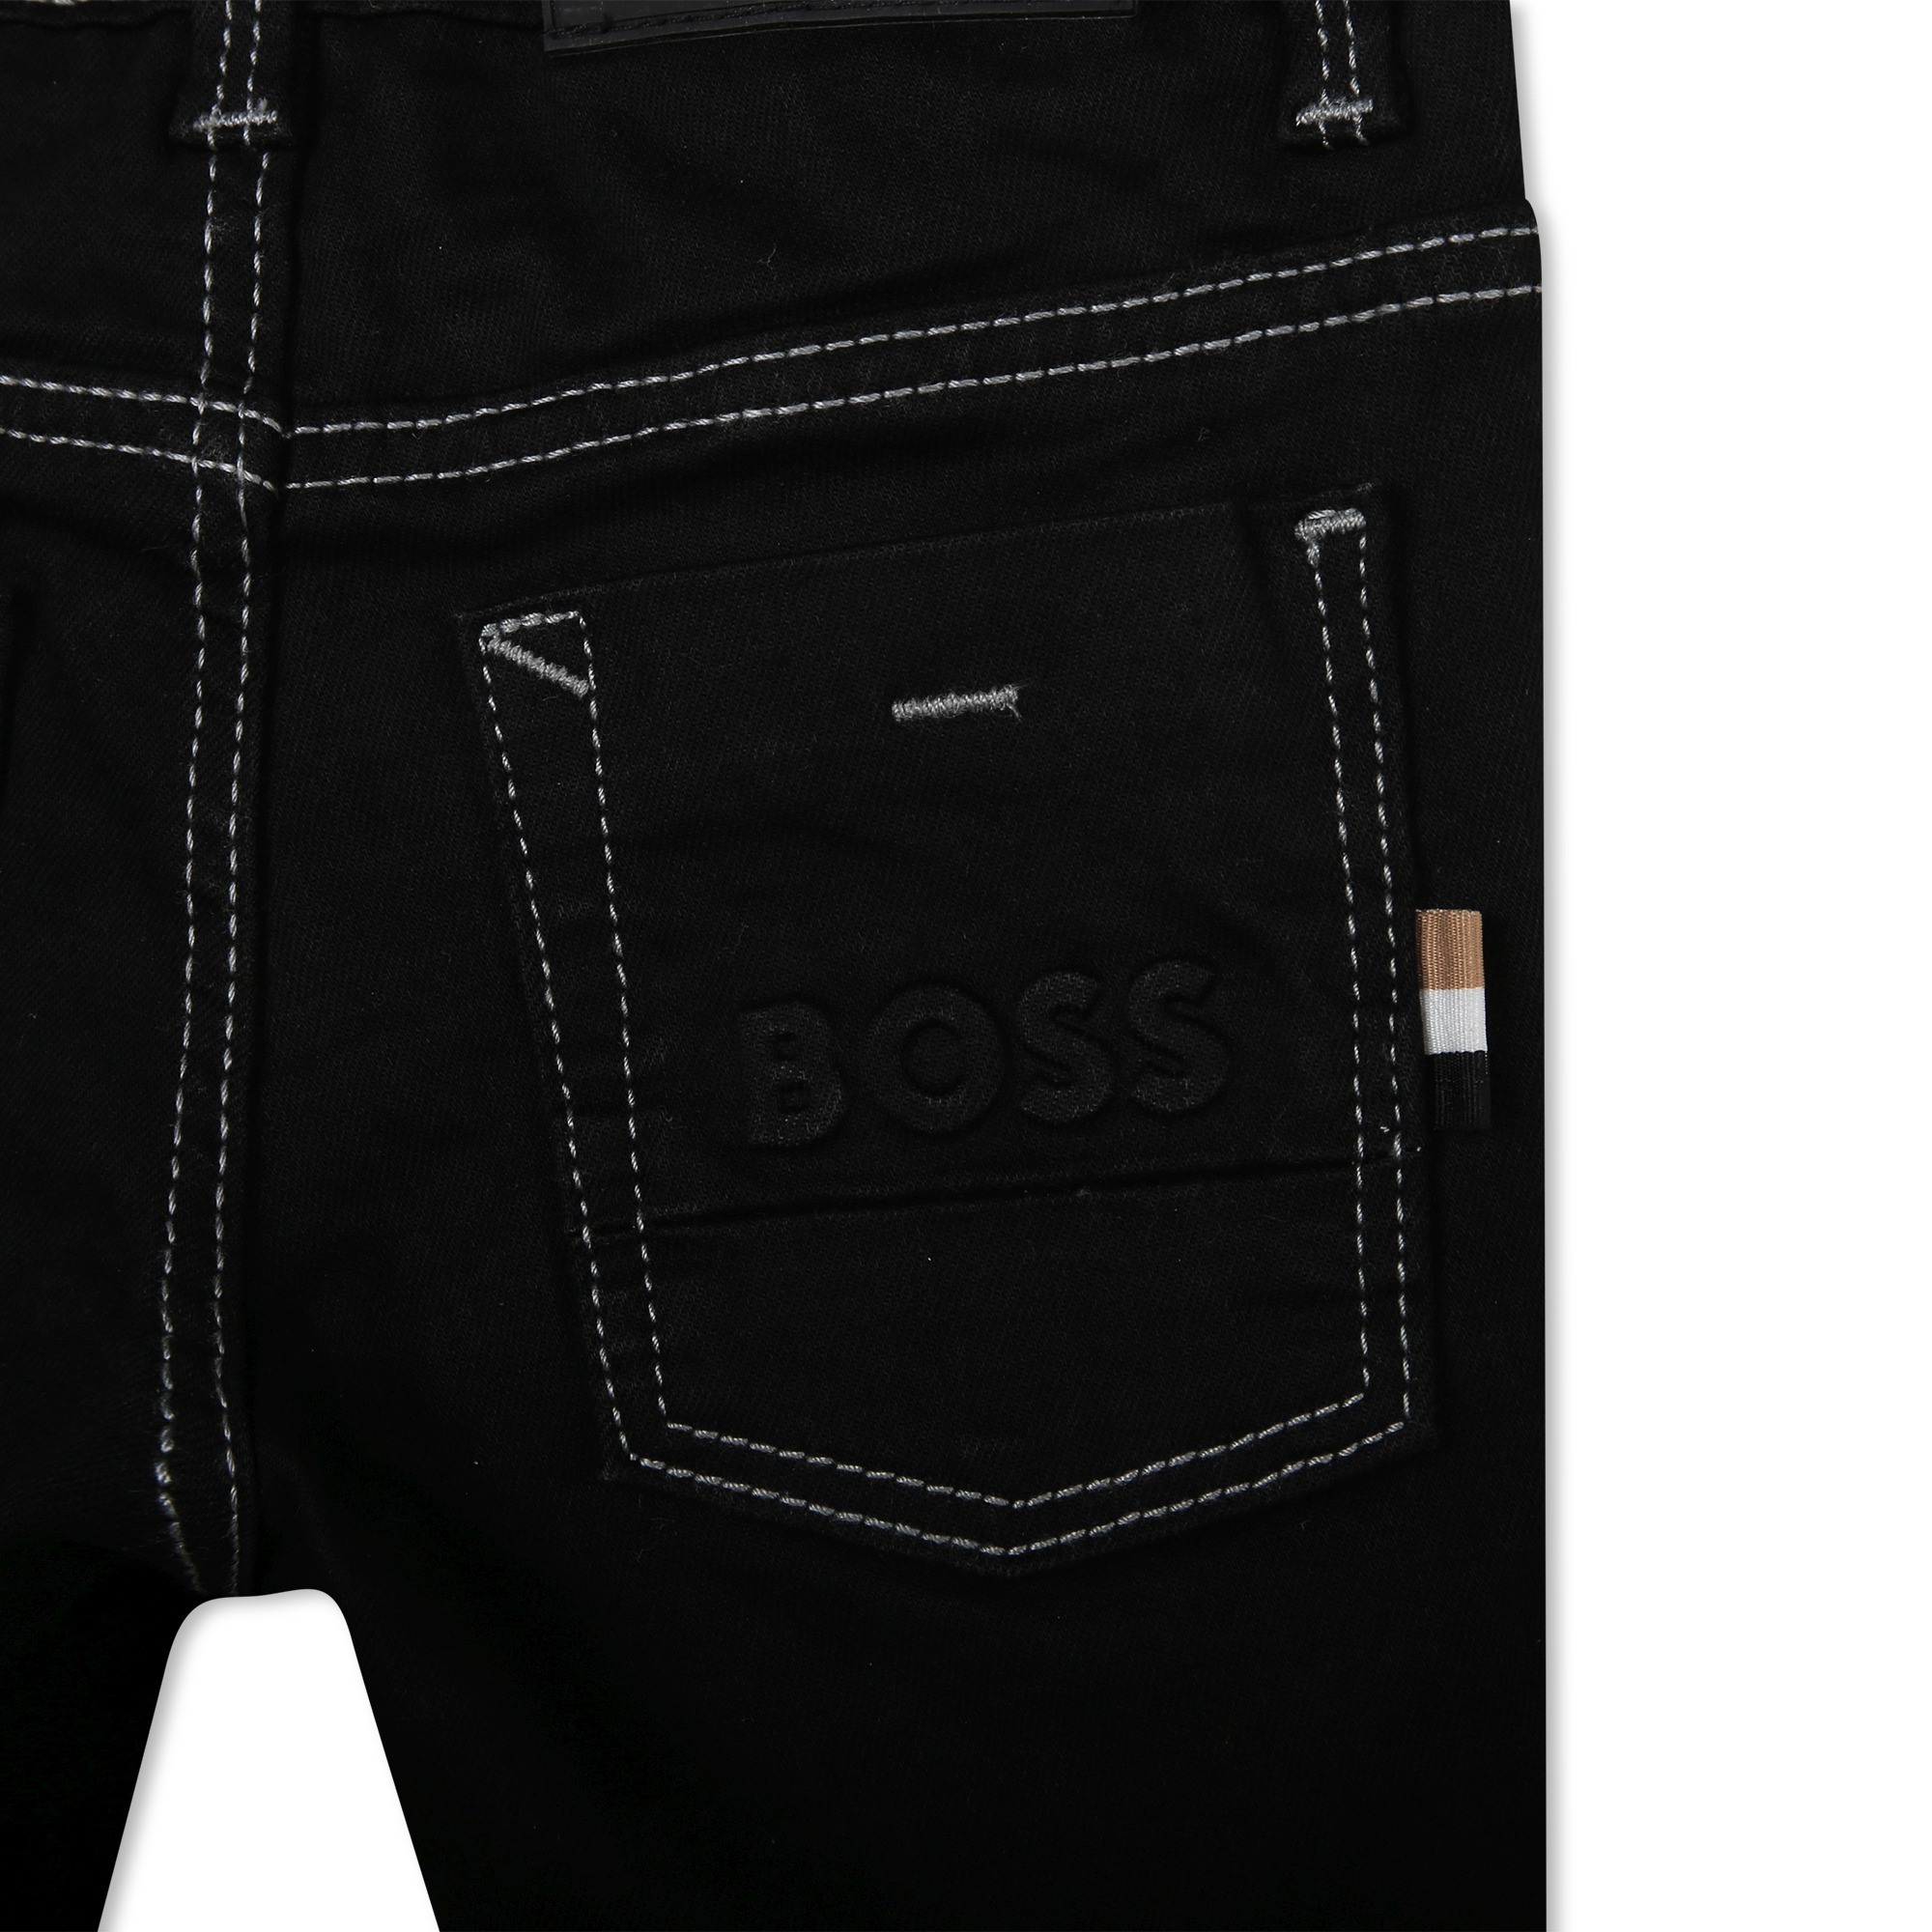 Denim trousers with pockets BOSS for BOY